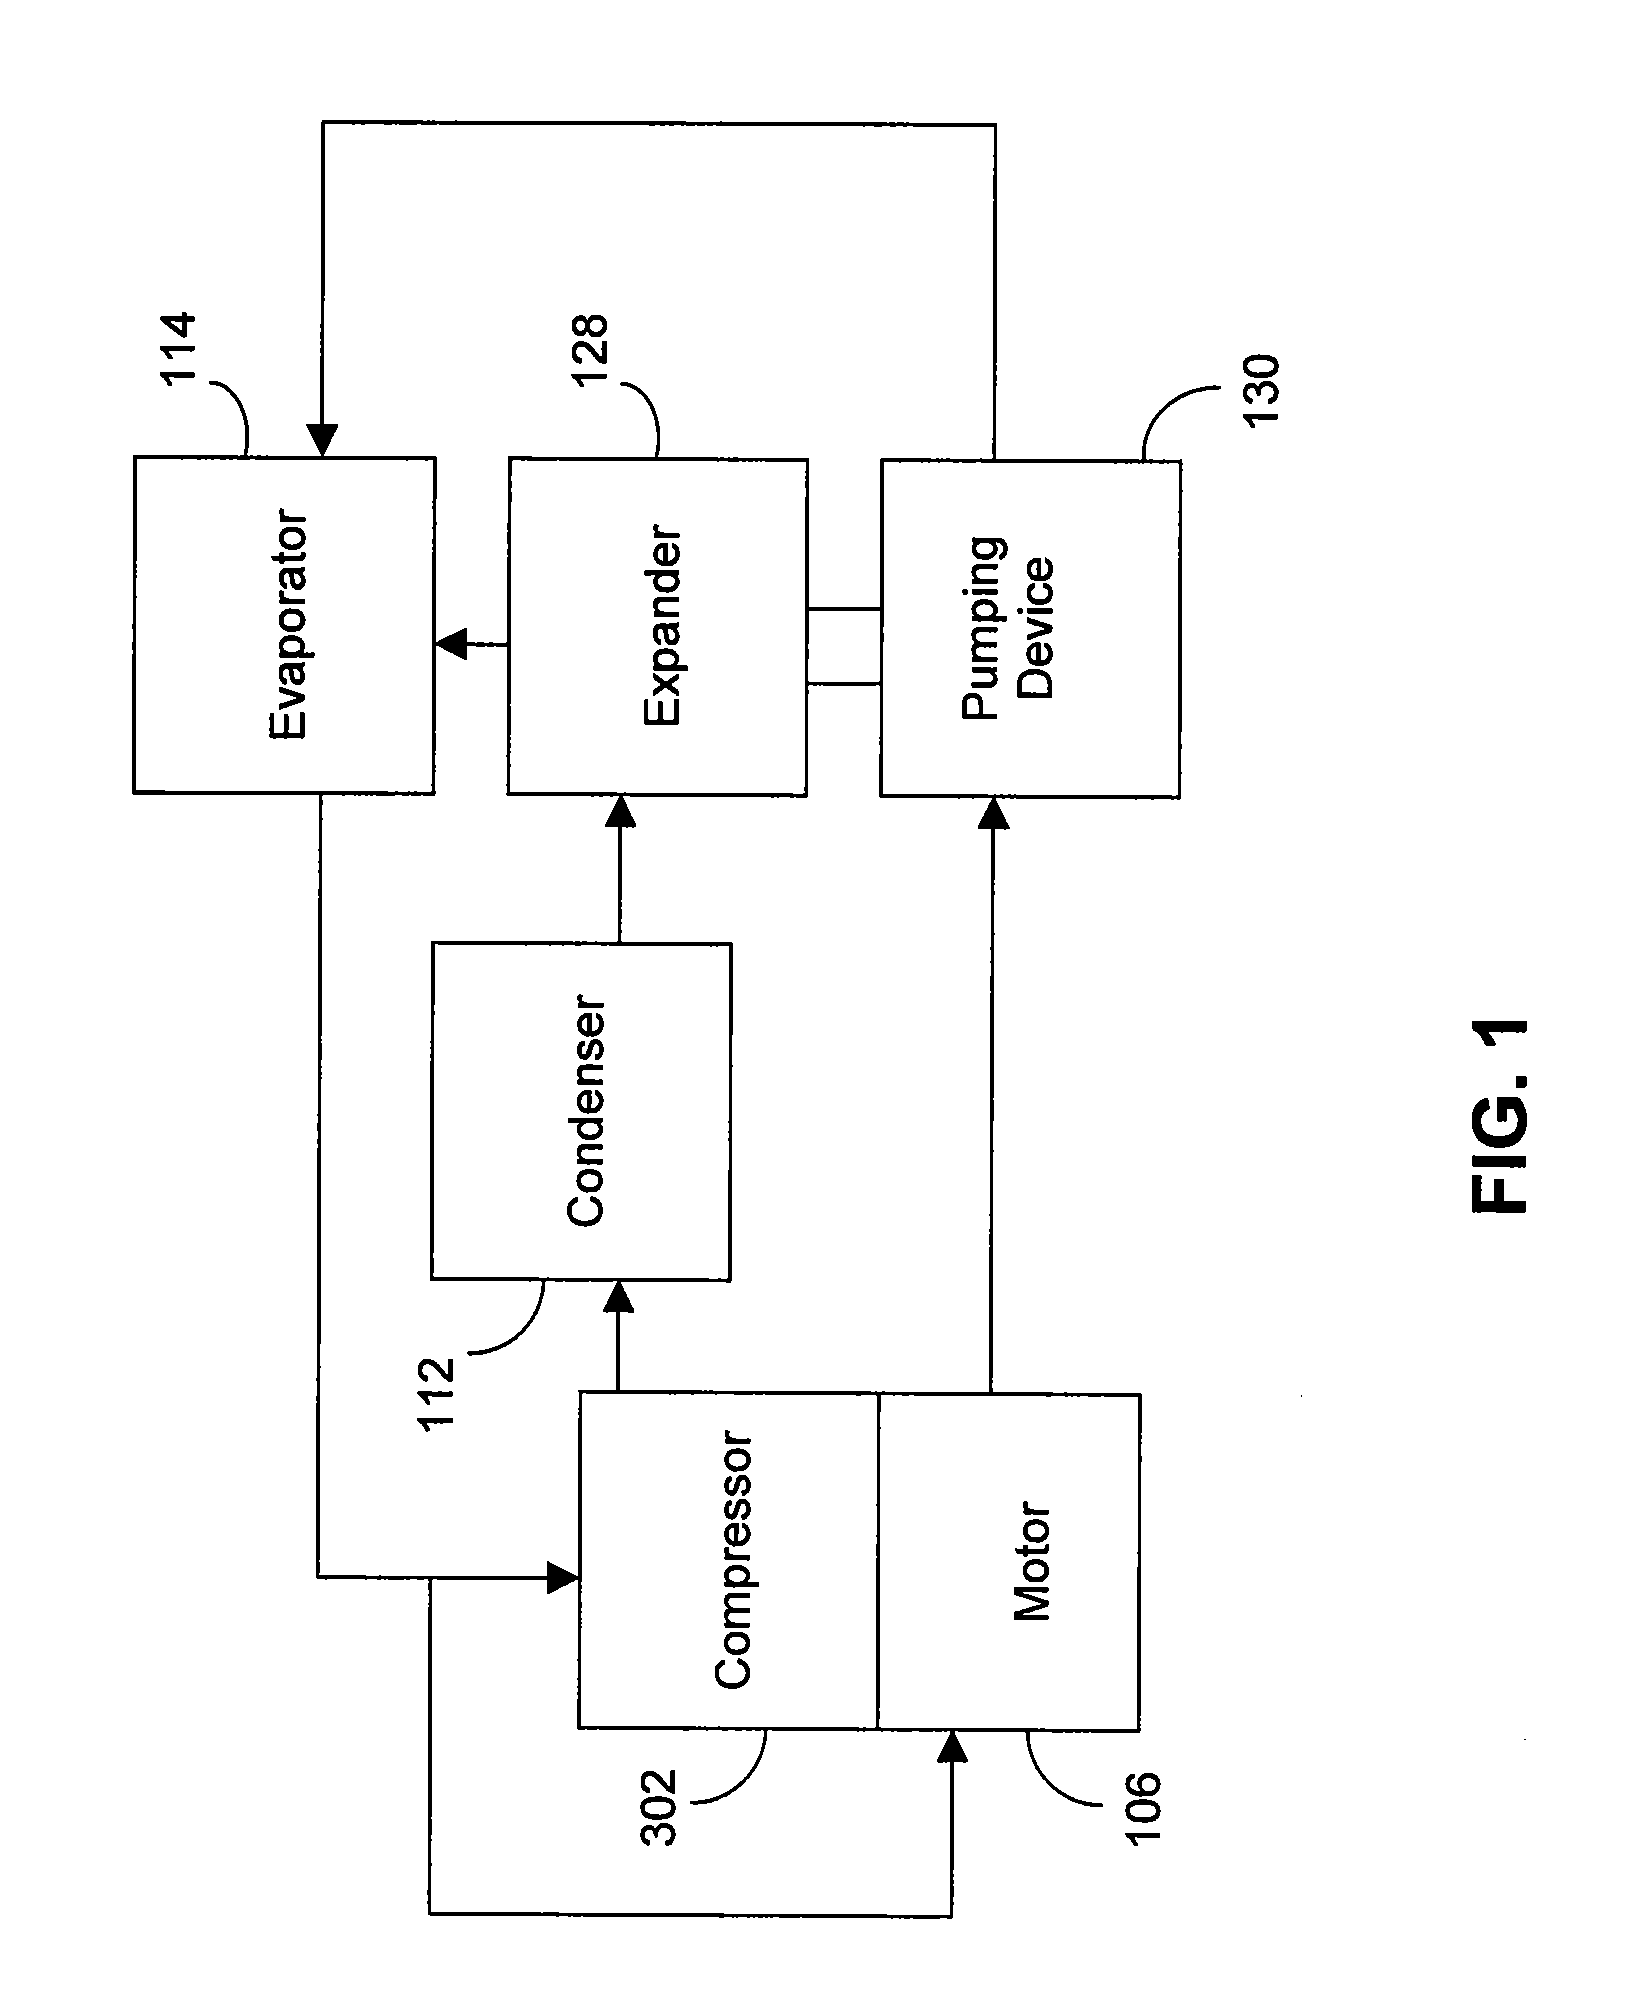 System and method for reducing windage losses in compressor motors